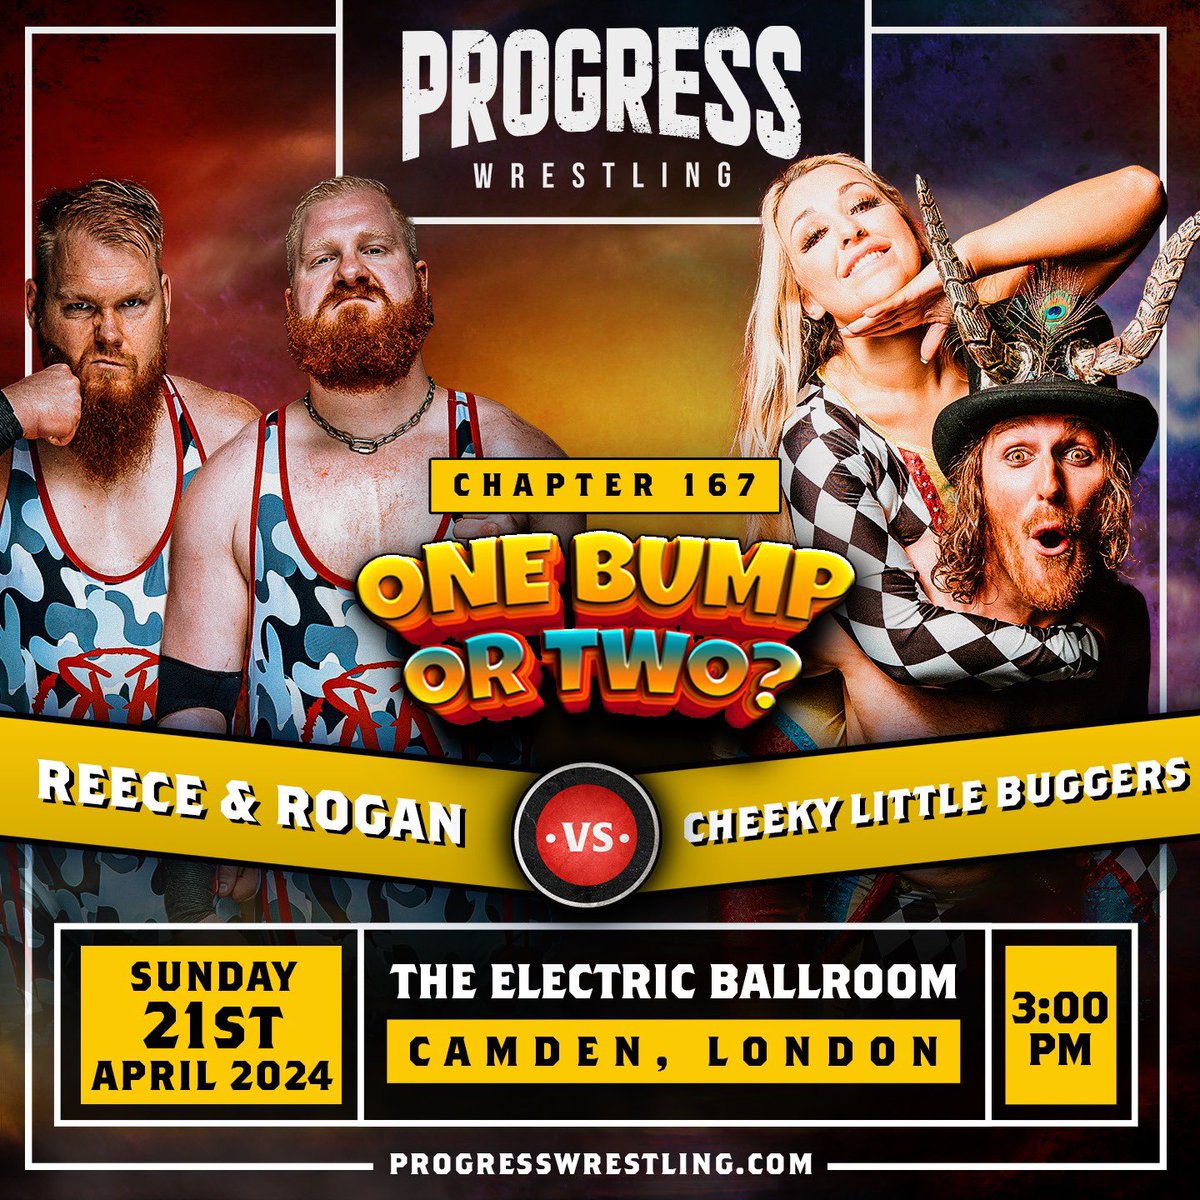 Good luck to my close friends @alexxisfalcon & @CrowleyCarnival as they take on those scamps, @W_B_Reece & @BigHossRogan, at @ThisIs_Progress. You've got this! 👍